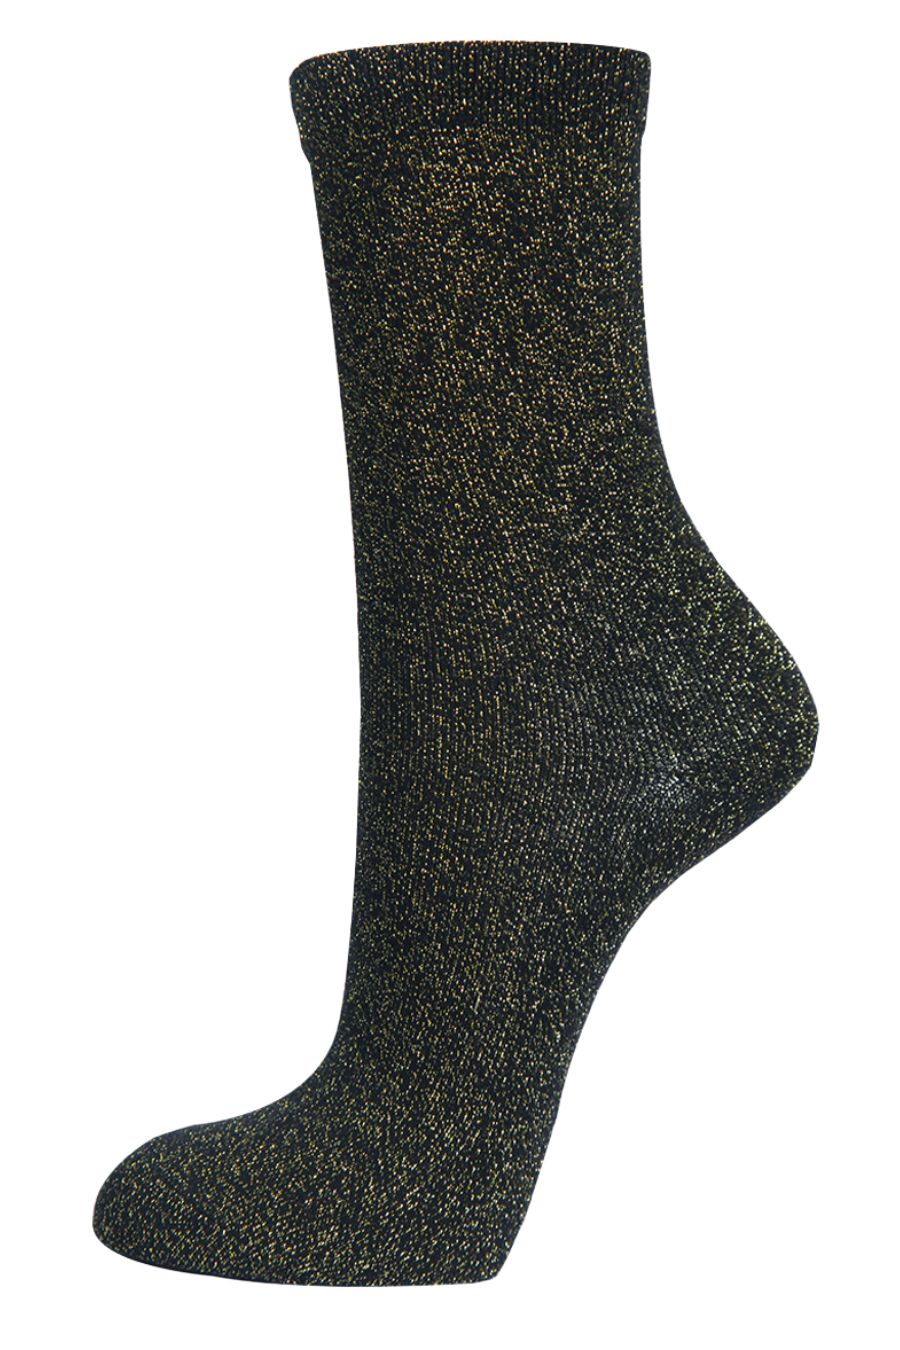 black ankle socks with an all over gold glitter effect